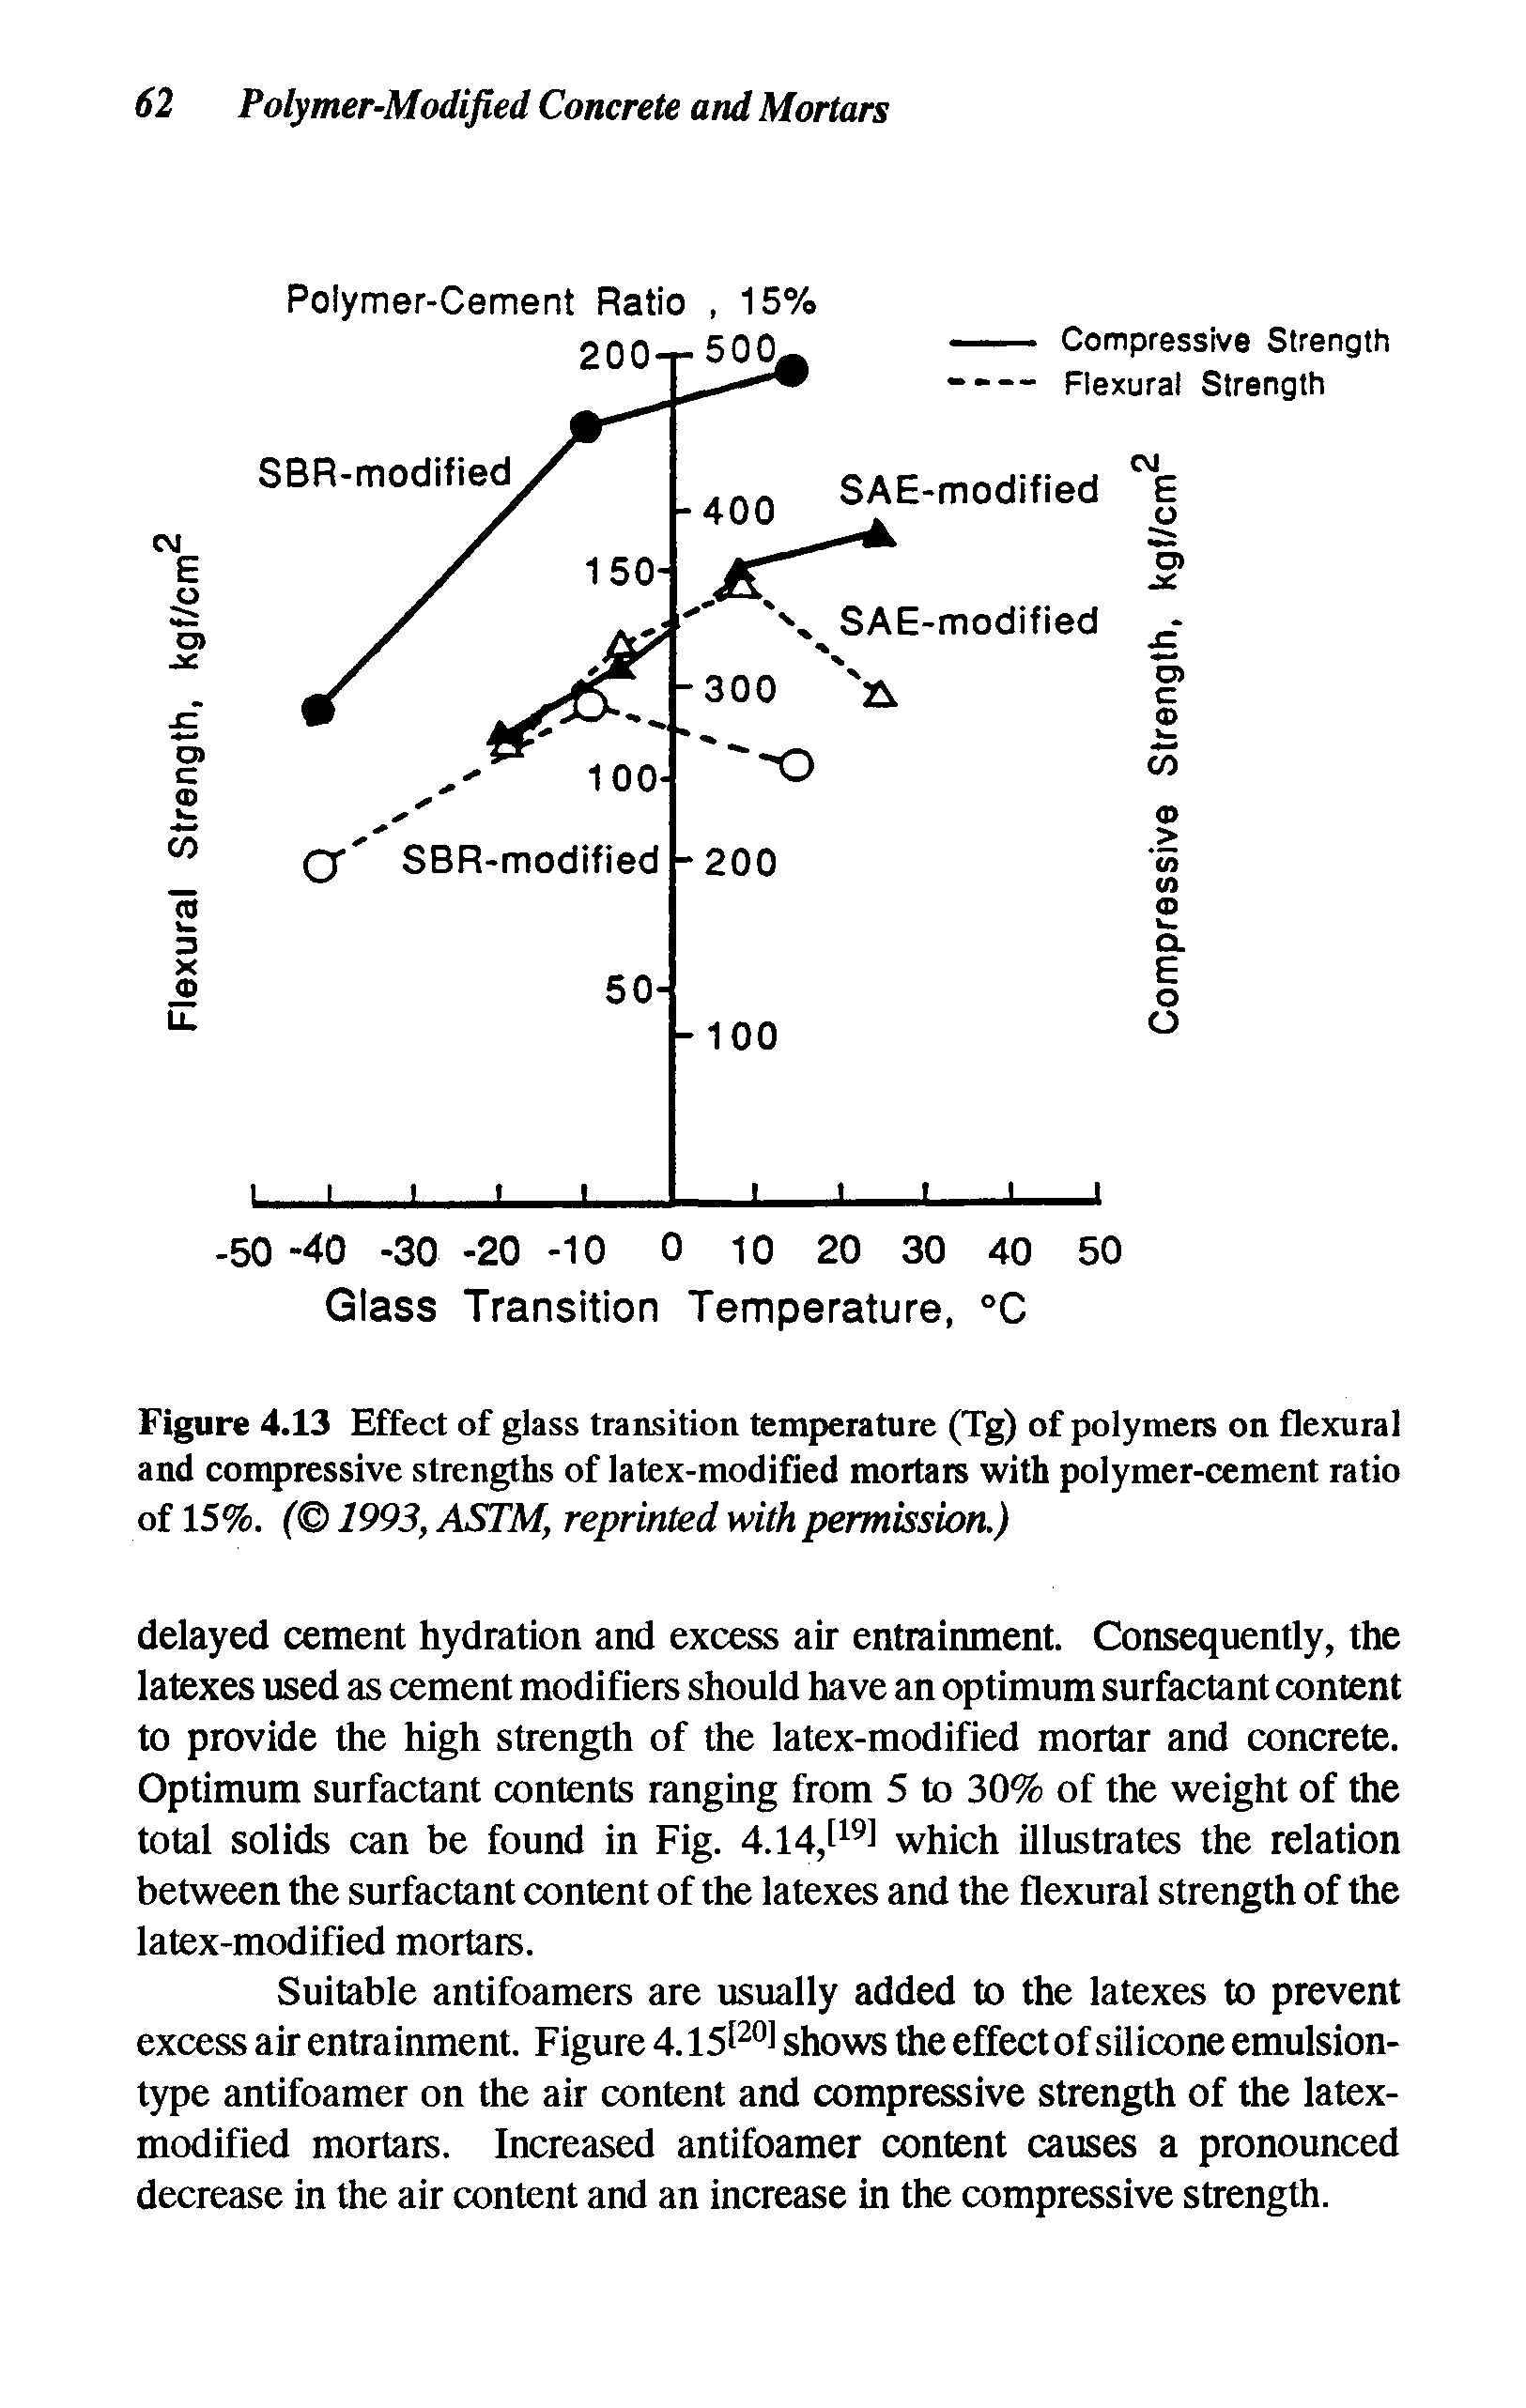 Figure 4.13 Effect of glass transition temperature (Tg) of polymers on flexural and compressive strengths of latex-modified mortars with polymer-cement ratio of 15%. ( 1993, ASTM, reprinted with permission.)...